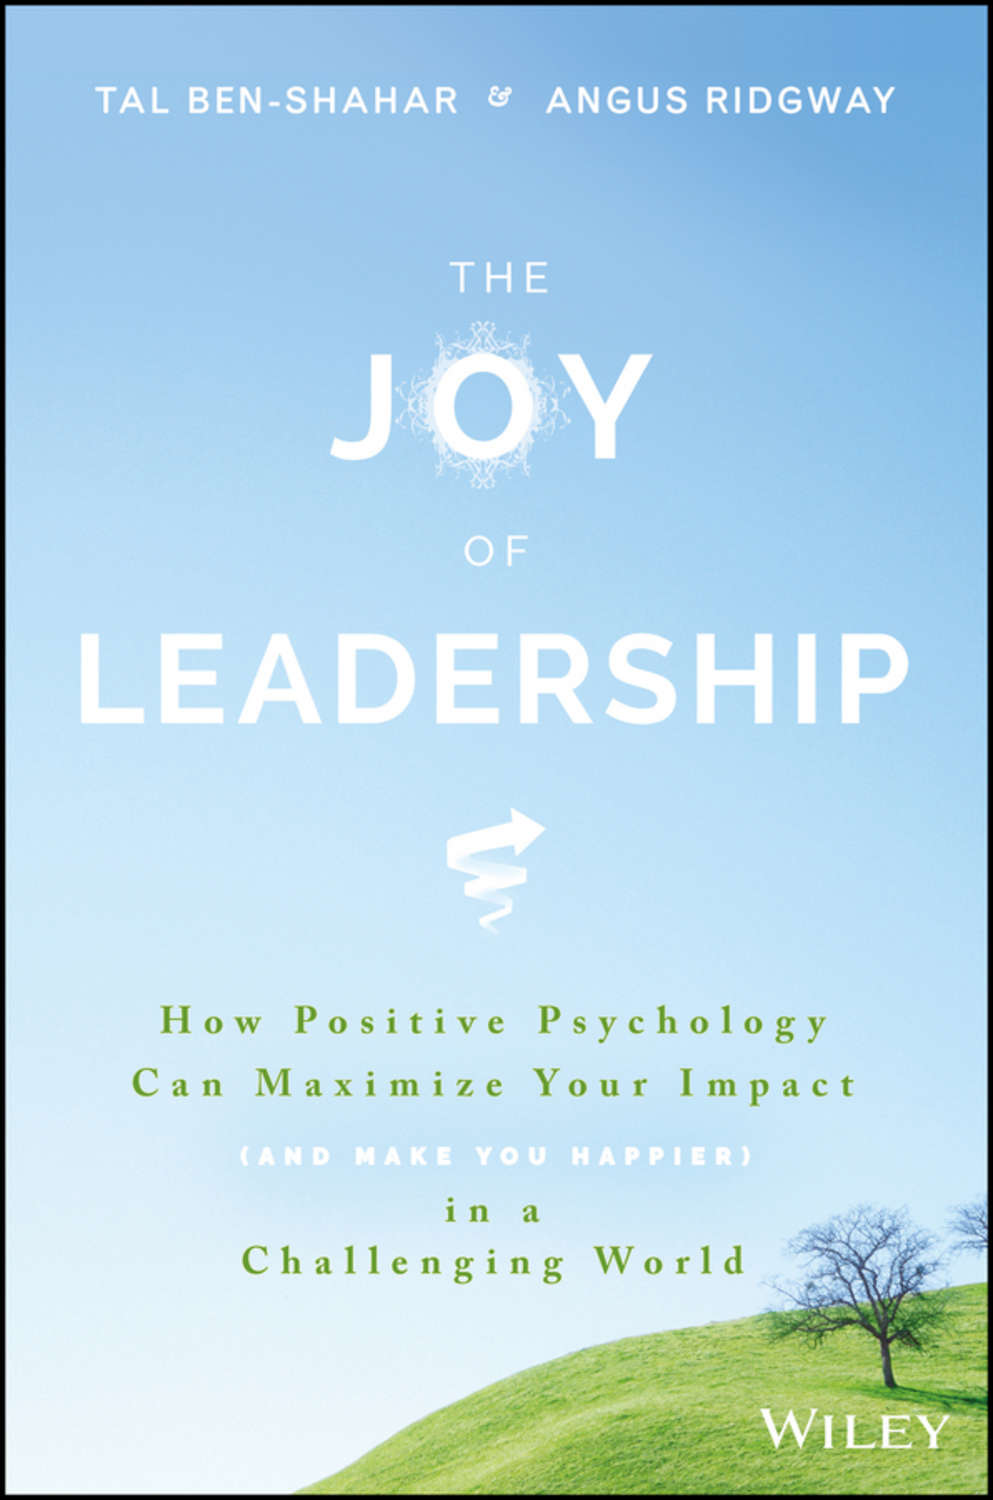 The Joy of Leadership How Positive Psychology Can Maximize Your Impact and Make You Happier in a Challenging World